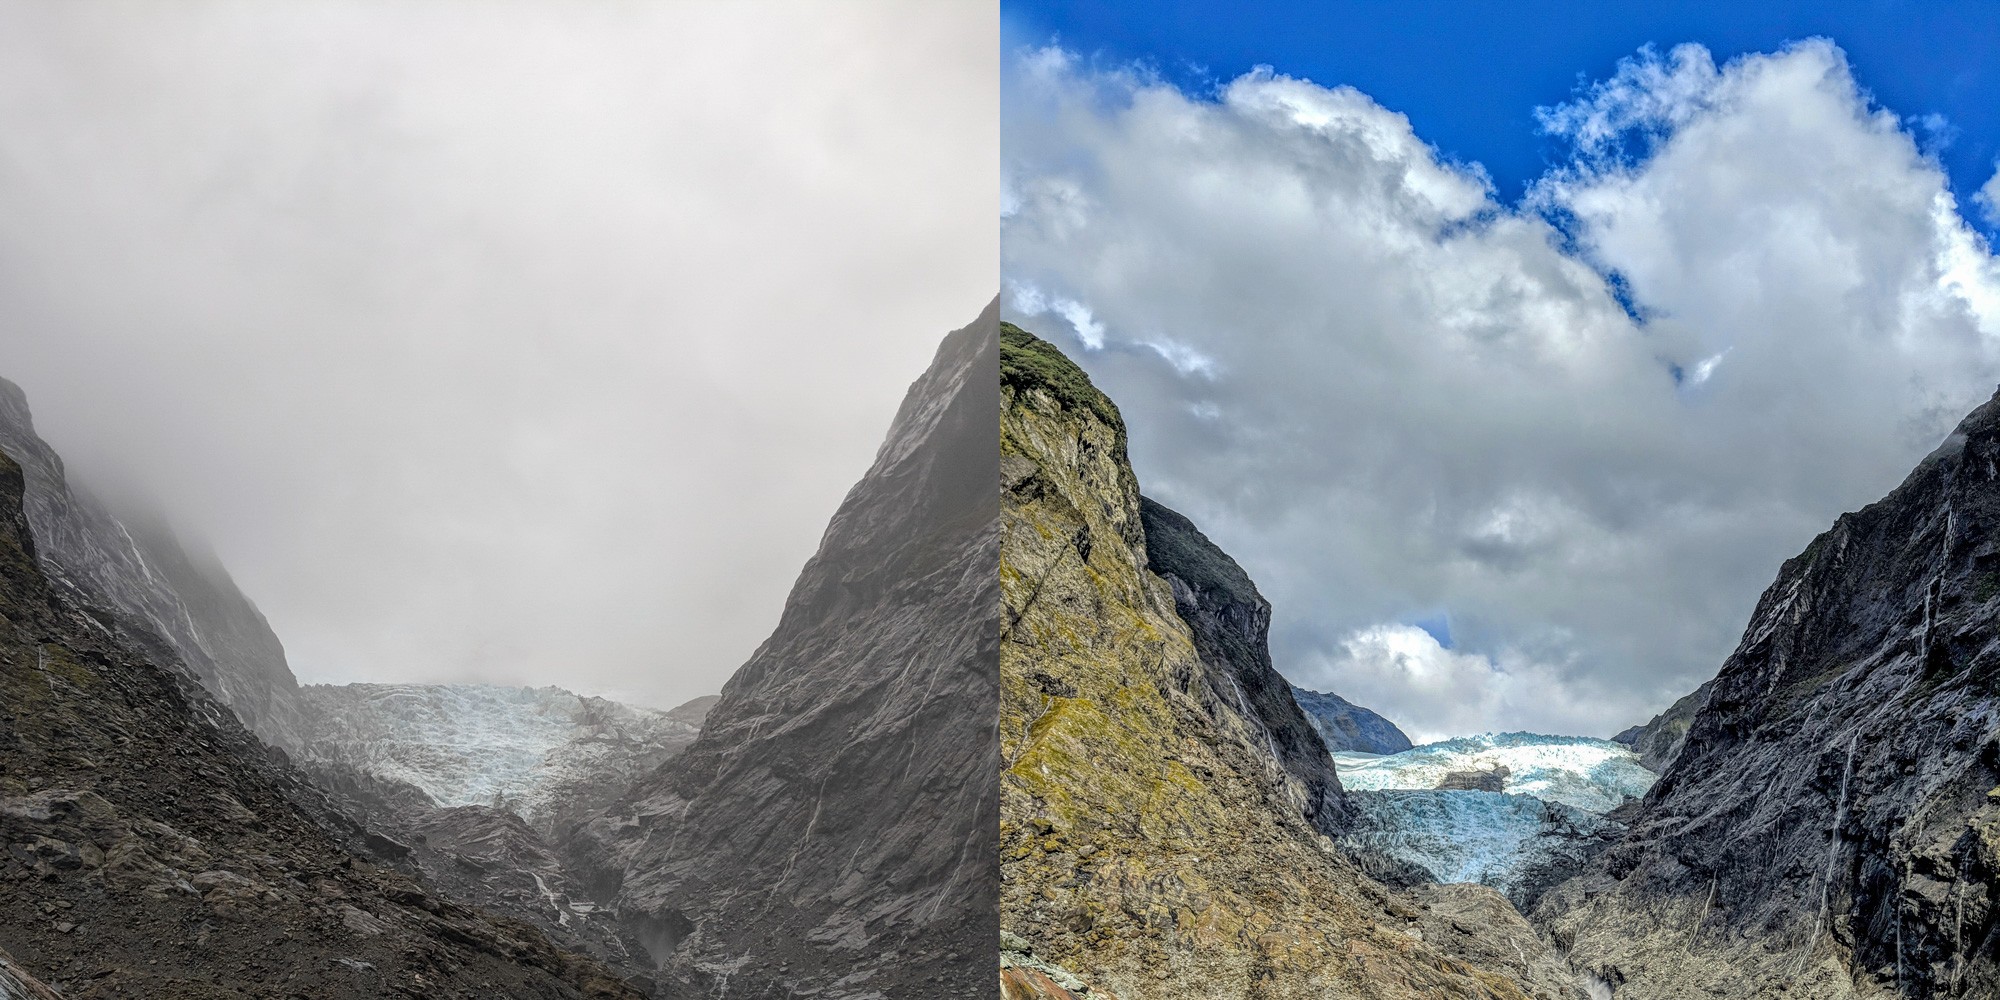 The weather above Franz Josef Glacier began to clear